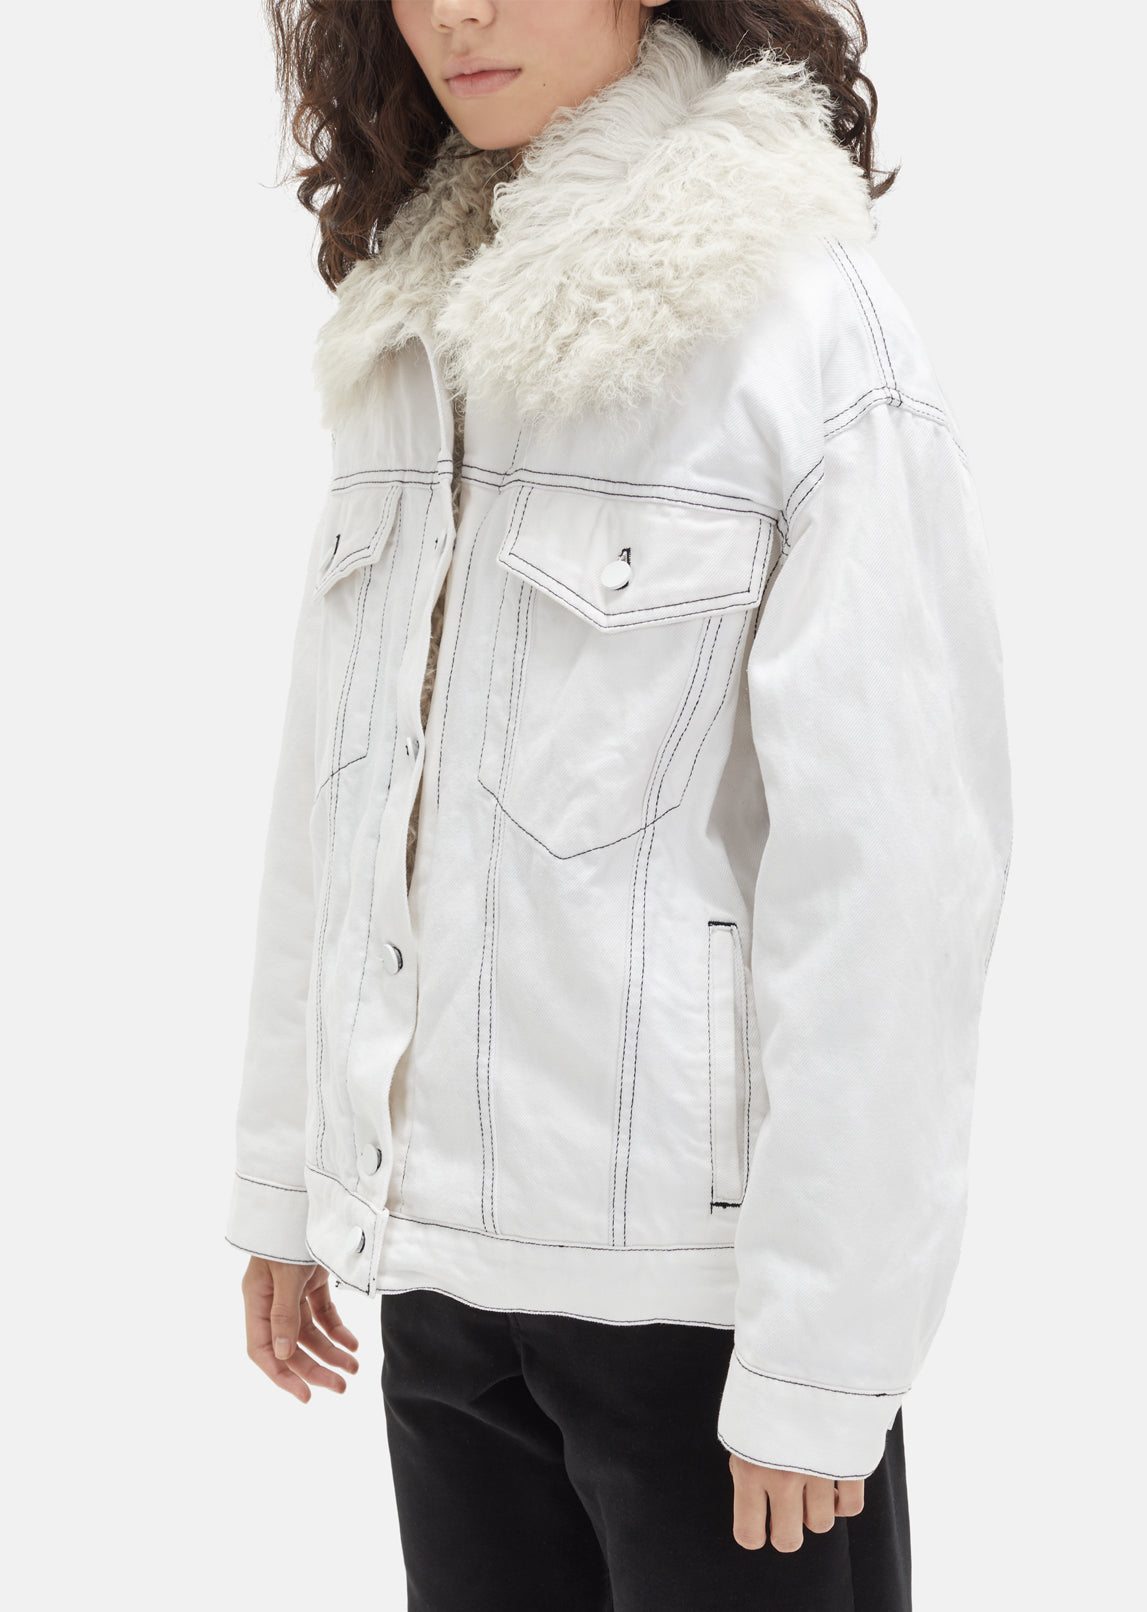 Fuloo's Women's Jeans Jacket with White Fur #1002 in Nepal - Buy Hoodies,  Jackets & Coats at Best Price at Thulo.Com